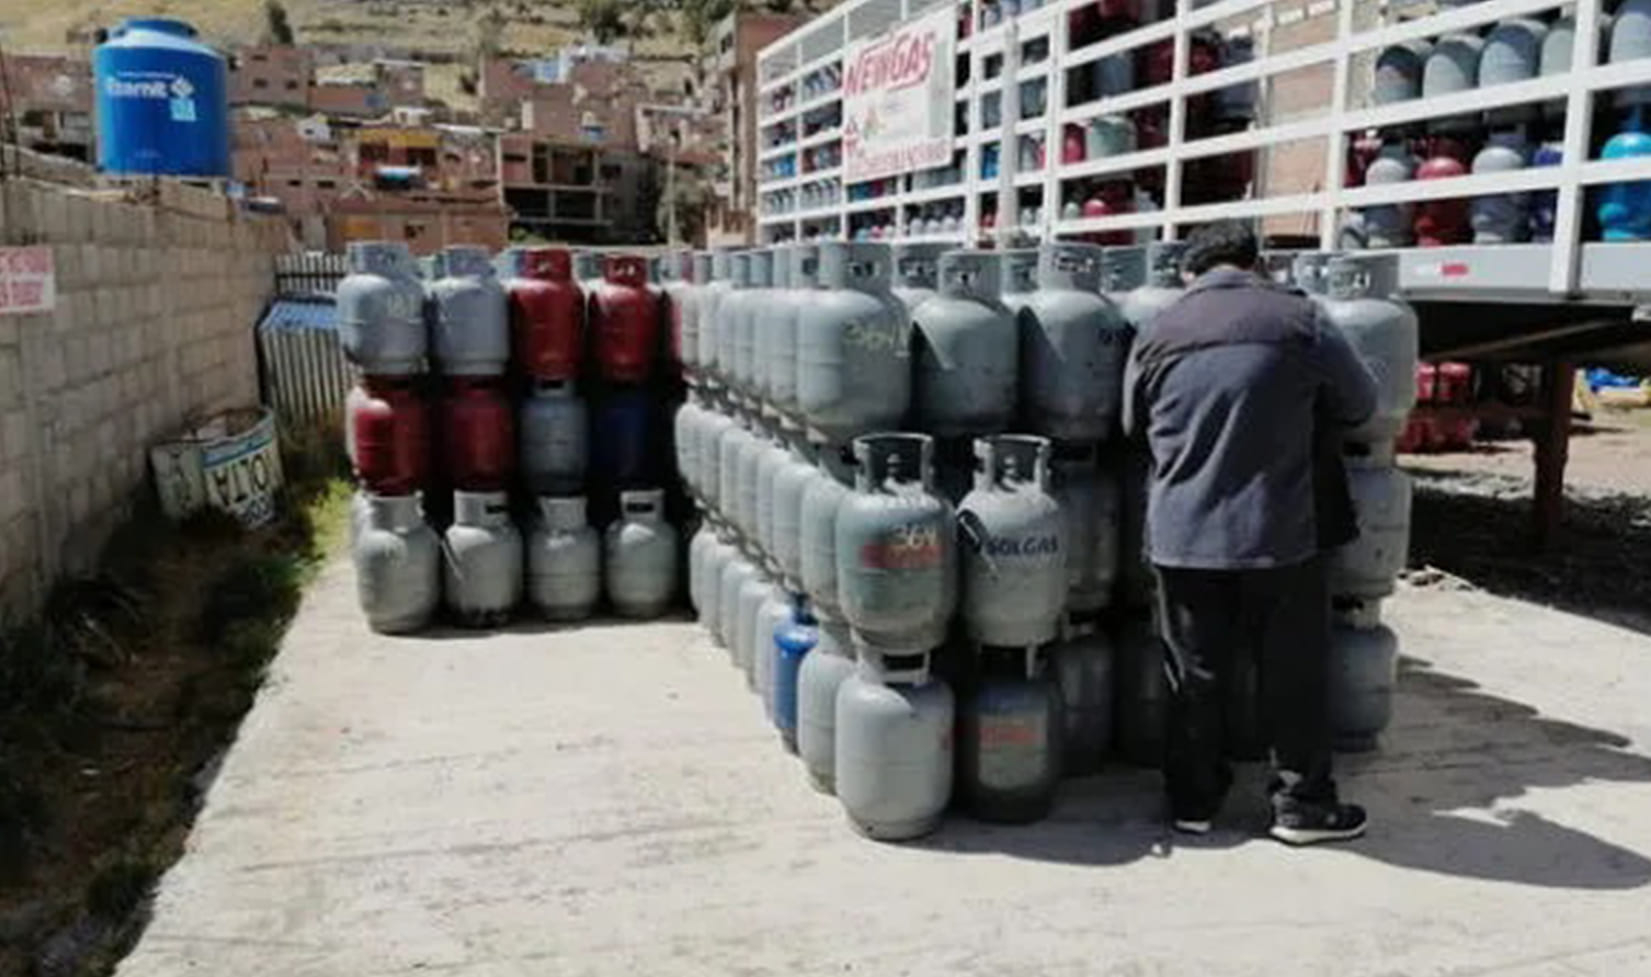 Gas cylinder price in Puno and Juliaca: how much is it and where are the cheapest ones sold?